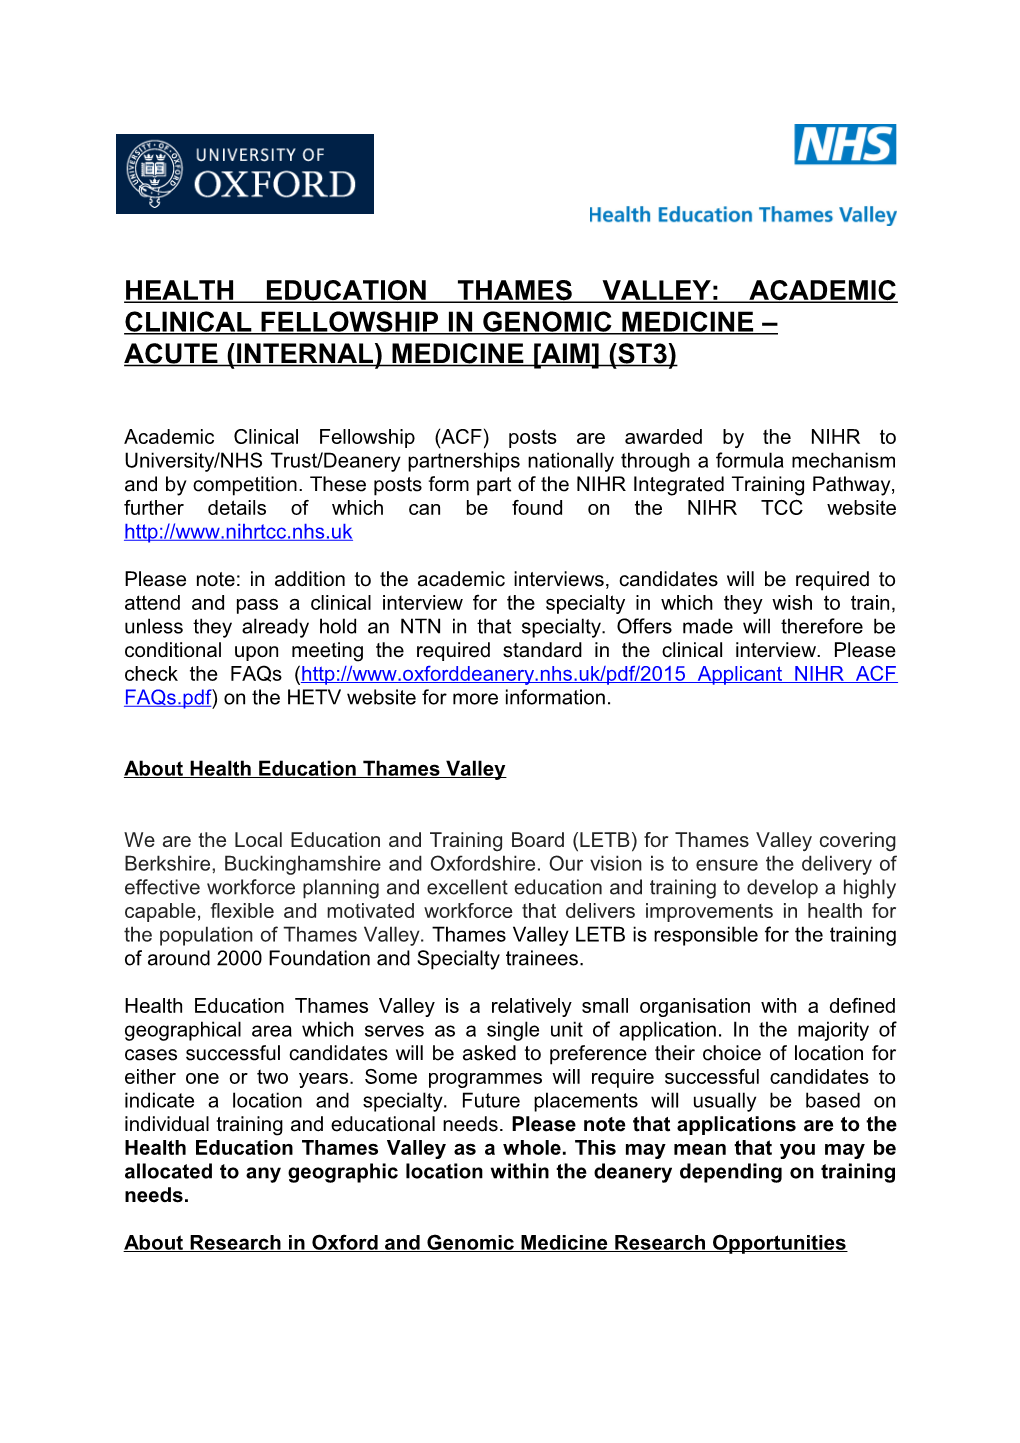 Health Education Thames Valley: Academic Clinical Fellowship in Genomic Medicine